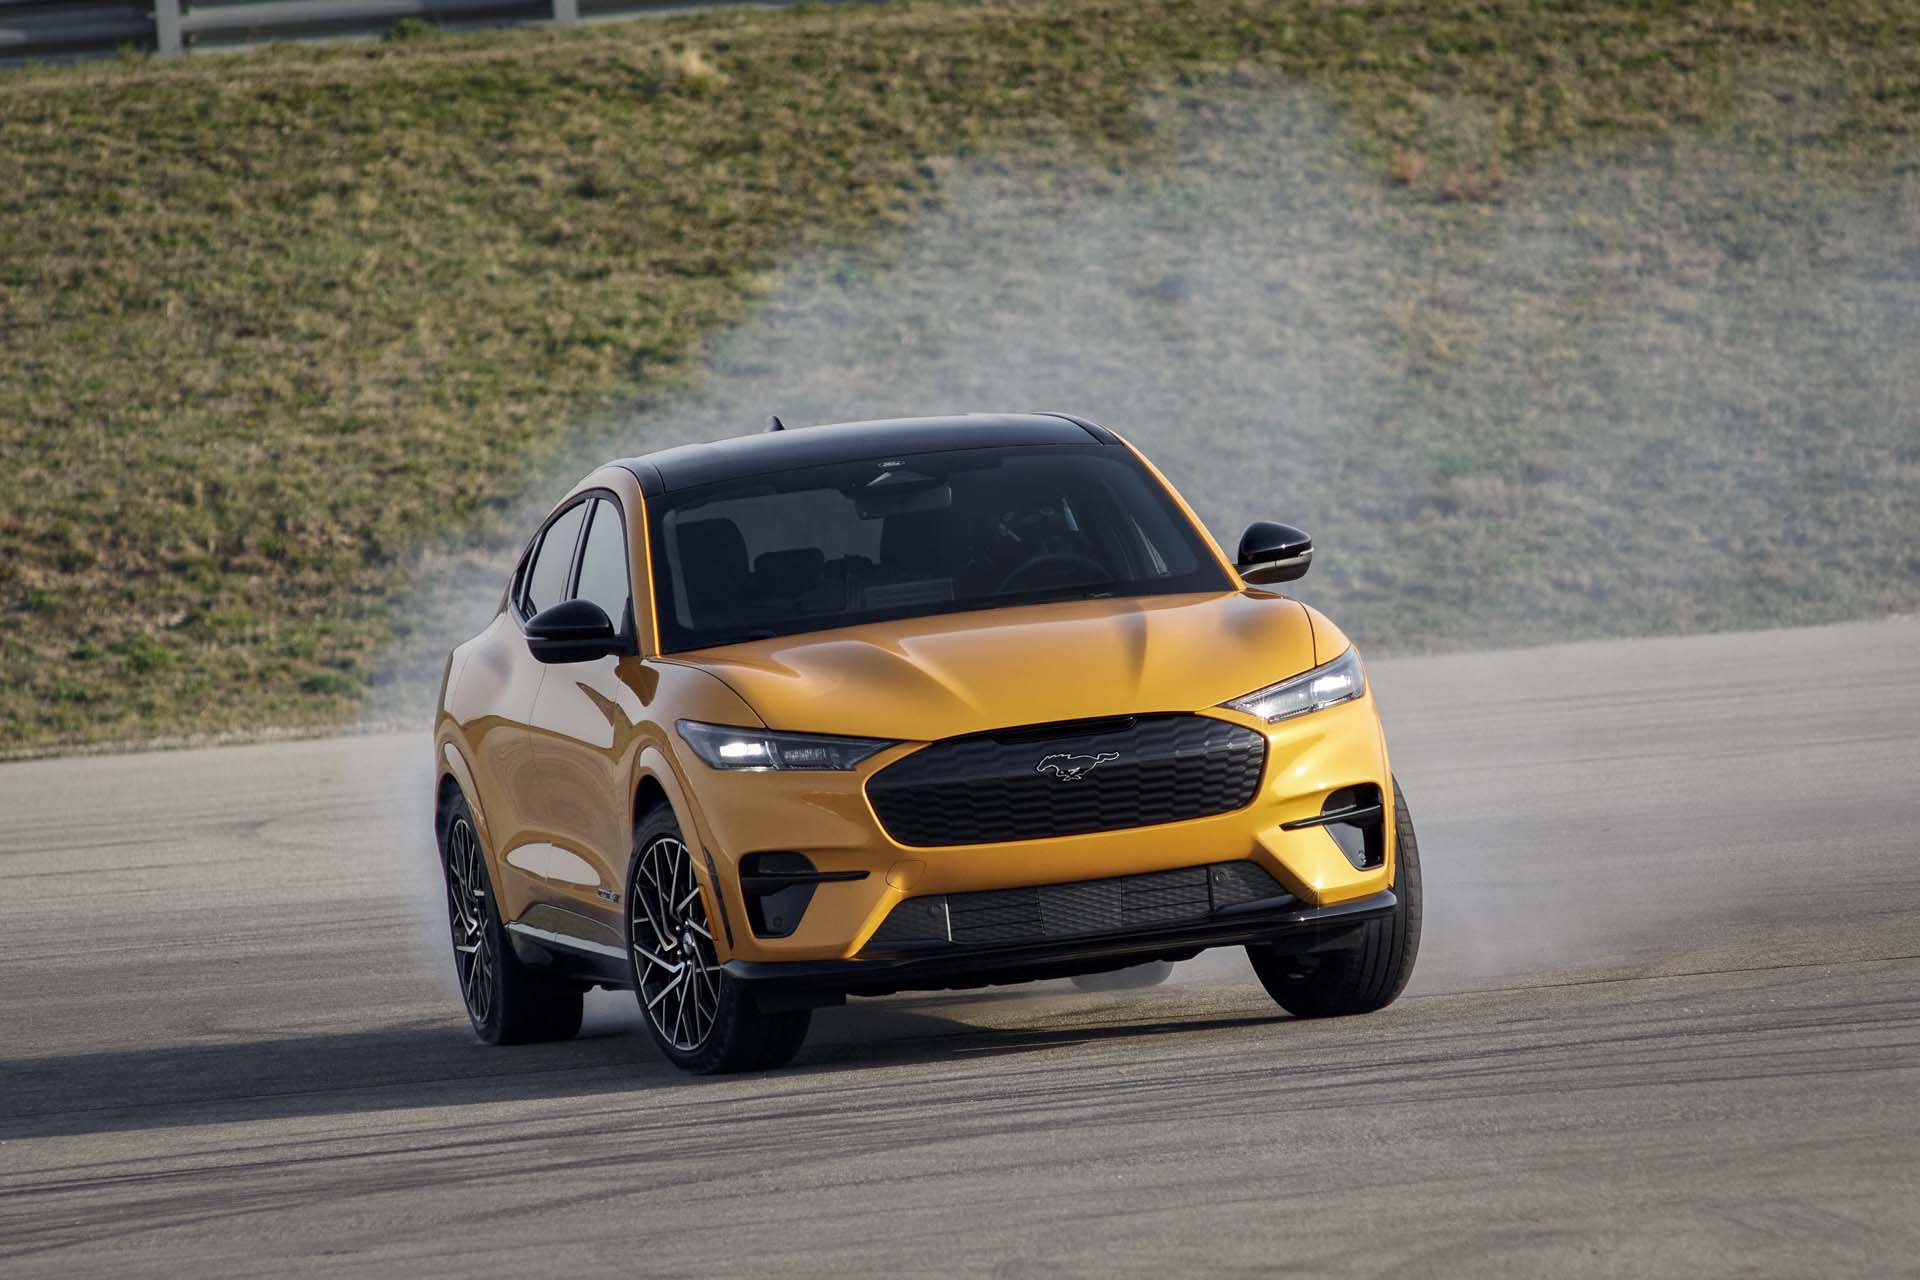 2021 Ford Mustang Mach E Gt And Gt Performance Priced From 61 000 Have Up To 270 Miles Of Range - heat seeking rocket launcher roblox id